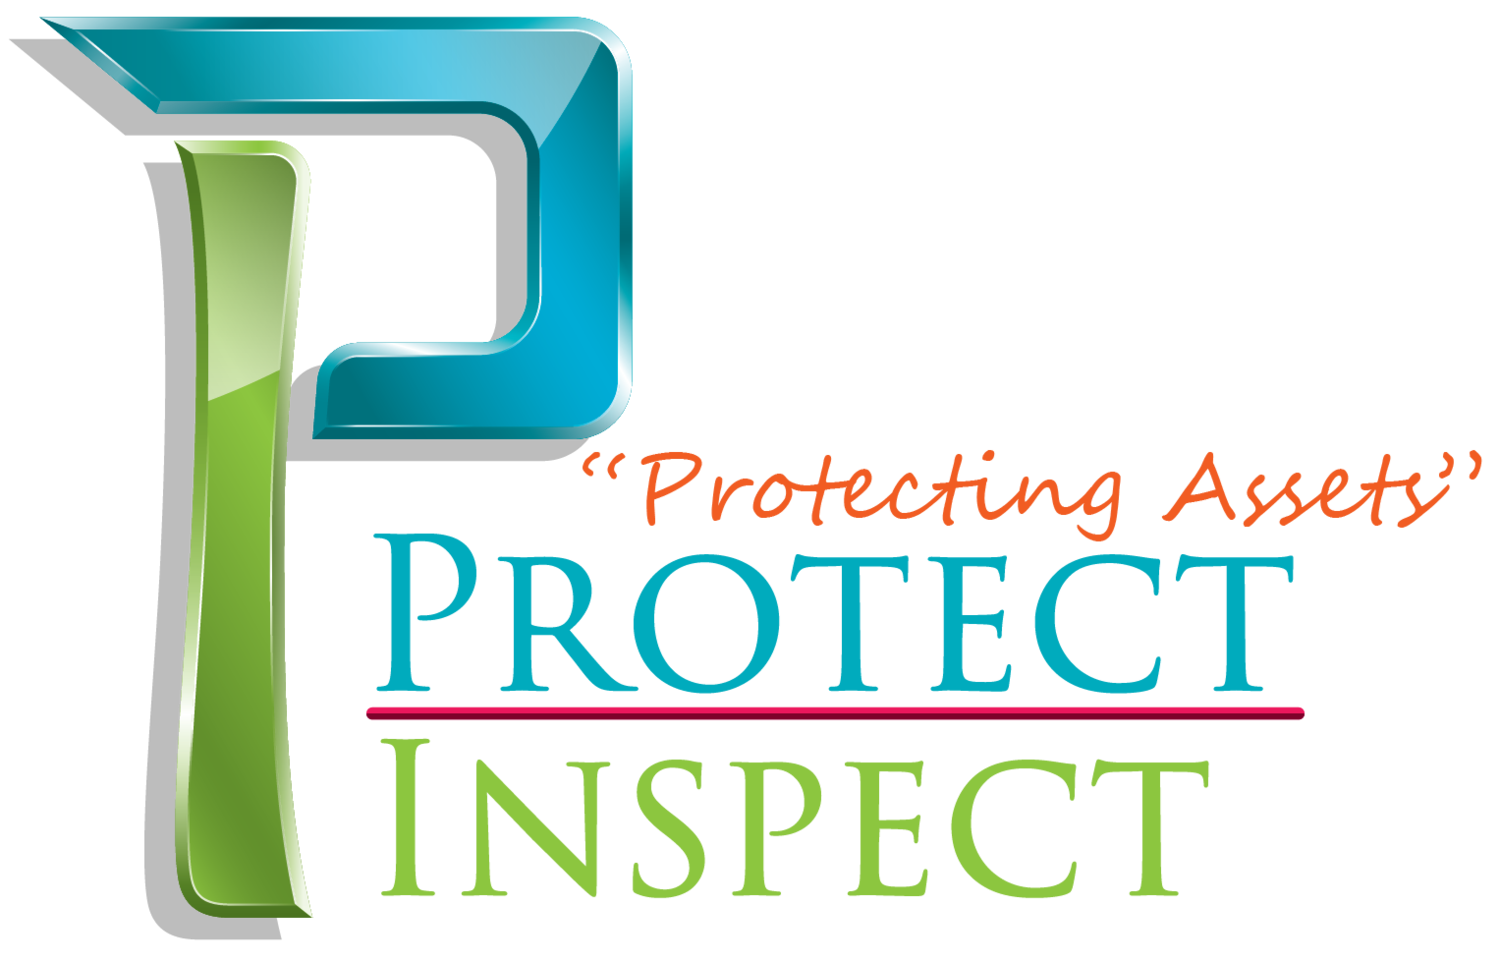 "Protect-Inspect"